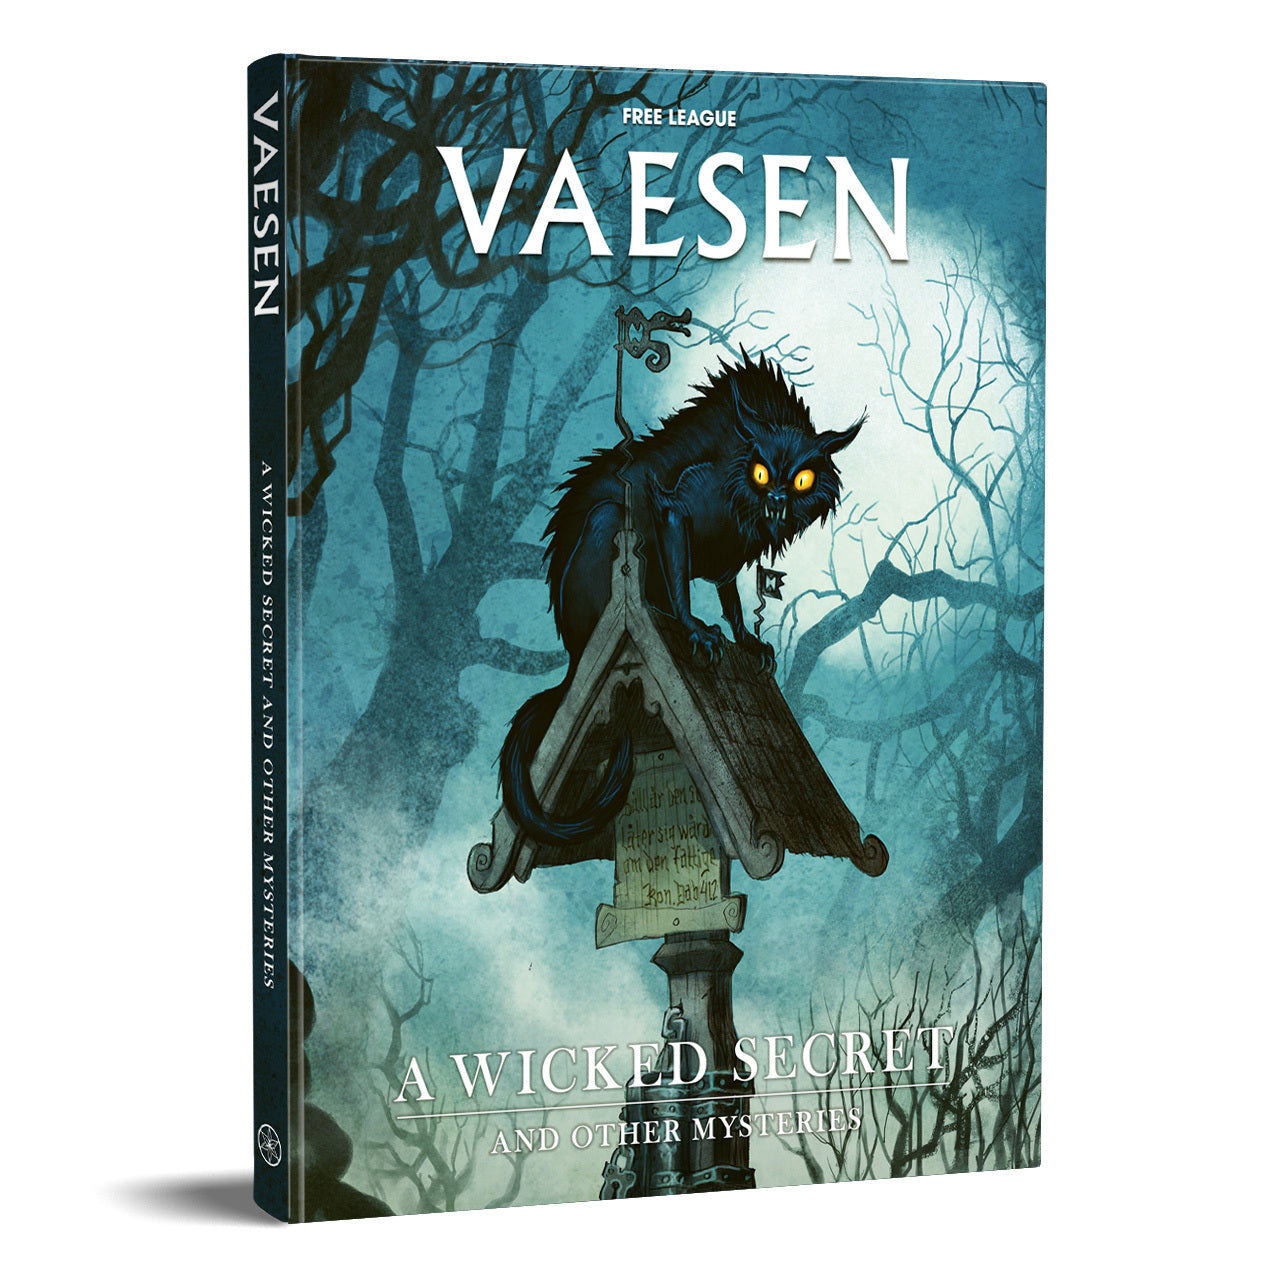 A Wicked Secret and Other Mysteries: Vaesen RPG -  Free League